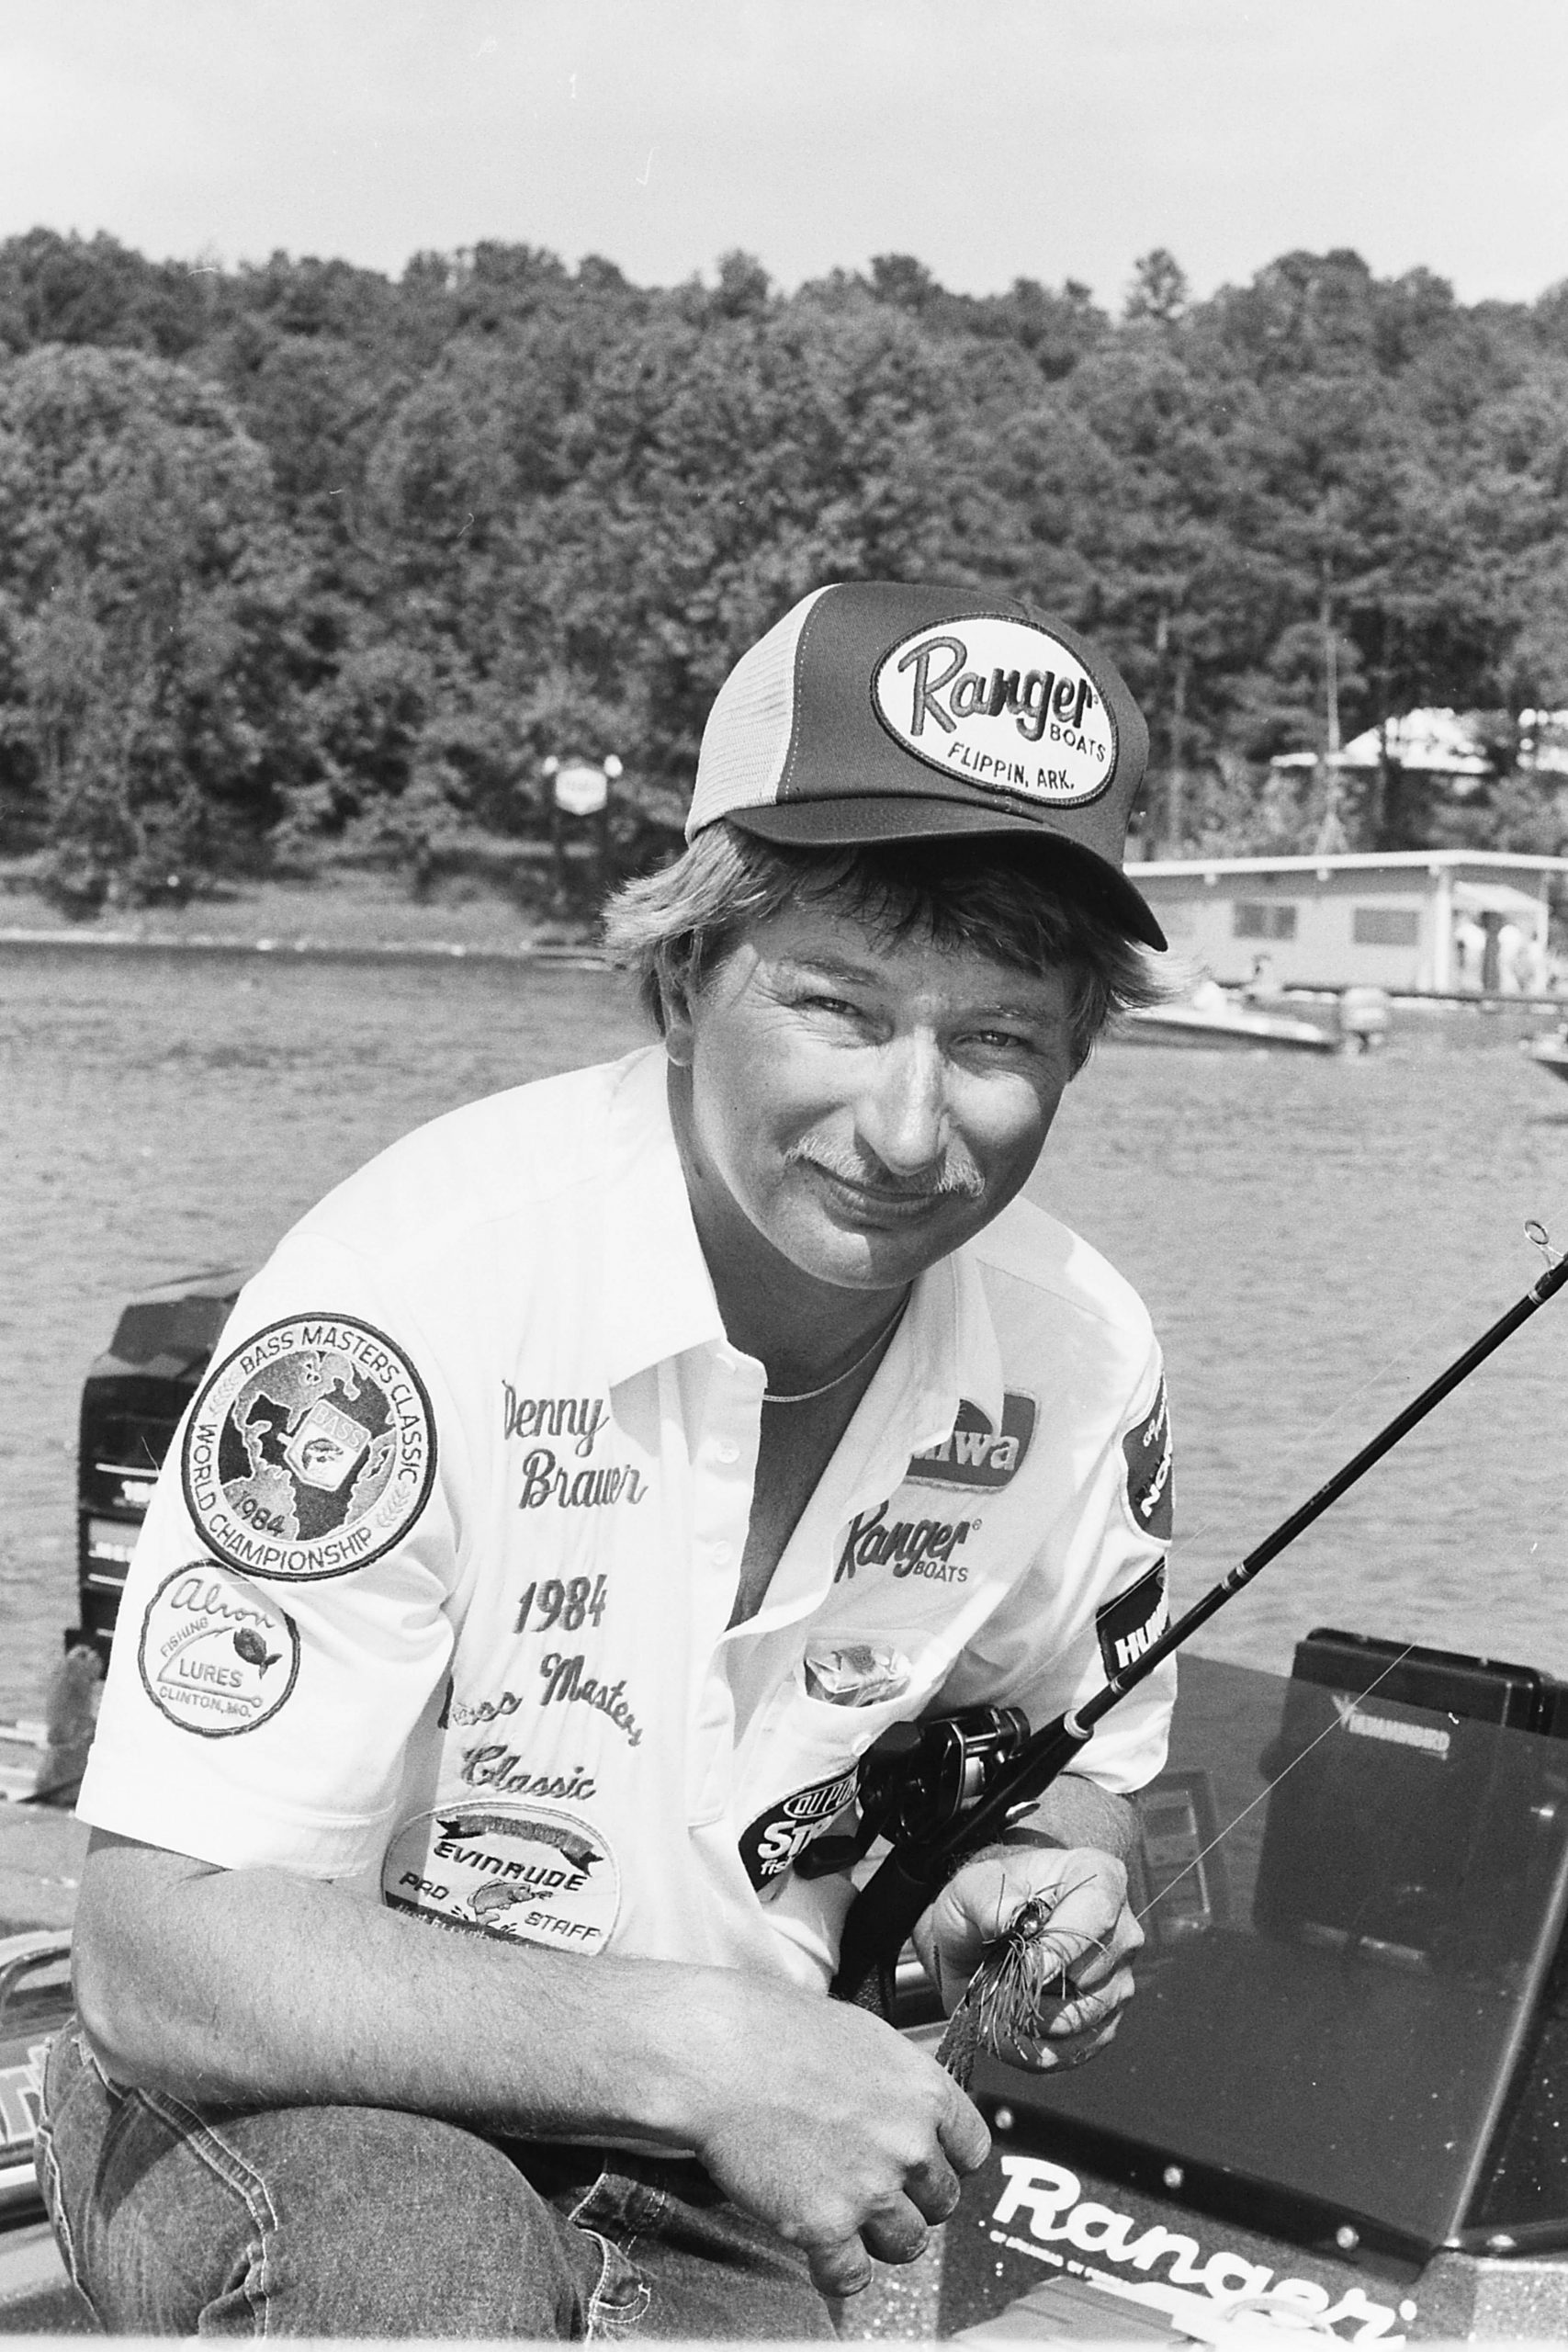 The first tournament B.A.S.S. held there, the Bassmaster Chattanooga Invitational, was May 1-3, 1985. Now-retired Bassmaster Elite Series pro Denny Brauer won the three-day event with 15 bass weighing 35 pounds, 2 ounces. He caught his fish the first two days in the milfoil of Dallas Bay using a 3/8-ounce jig and an Uncle Josh pork trailer. On the final day, he made a long run in heavy chop to a ridge near the Hiwassee River, where he caught more than 16 pounds on a Norman Deep Little N crankbait.